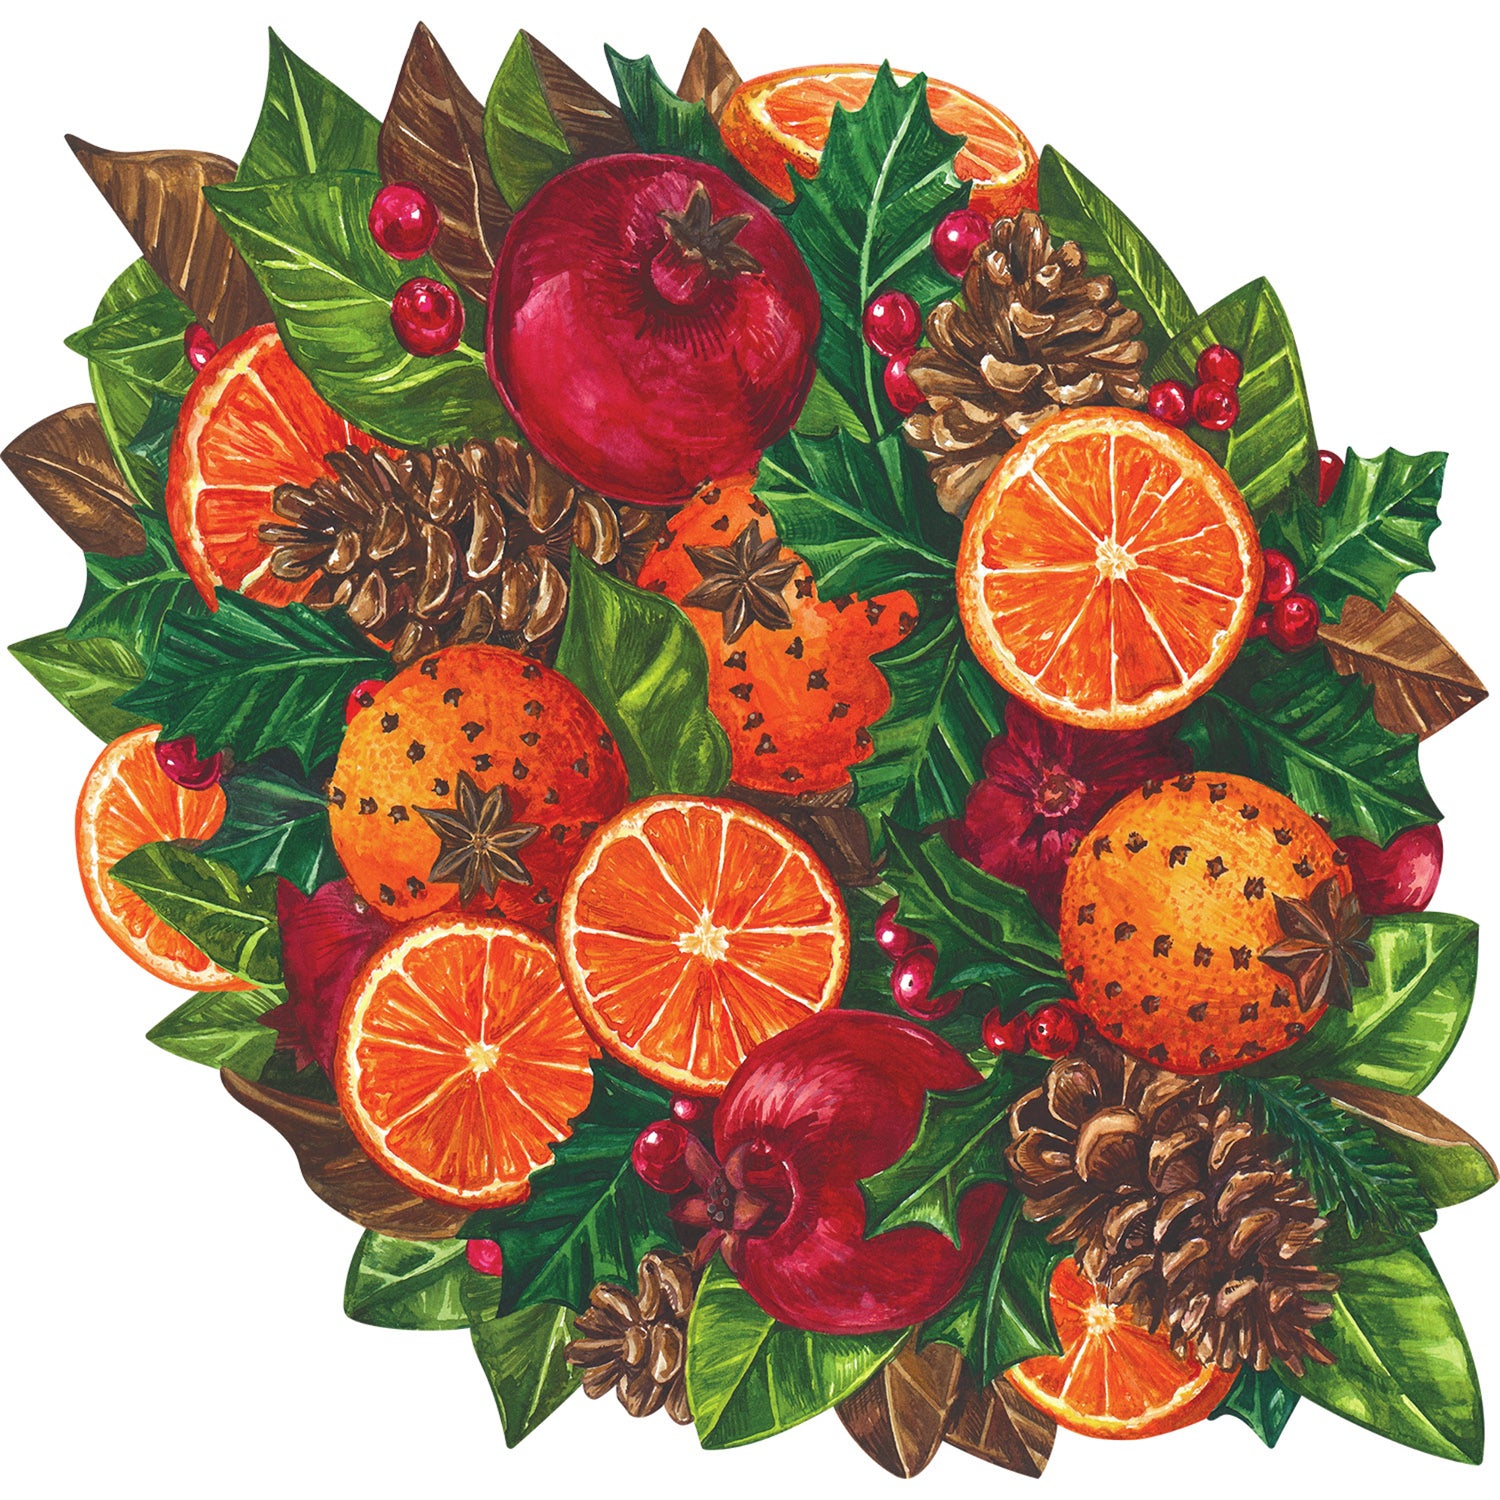 A die-cut illustration of densely-packed oranges, pomegranates and pinecones nestled among winter foliage with red berries.